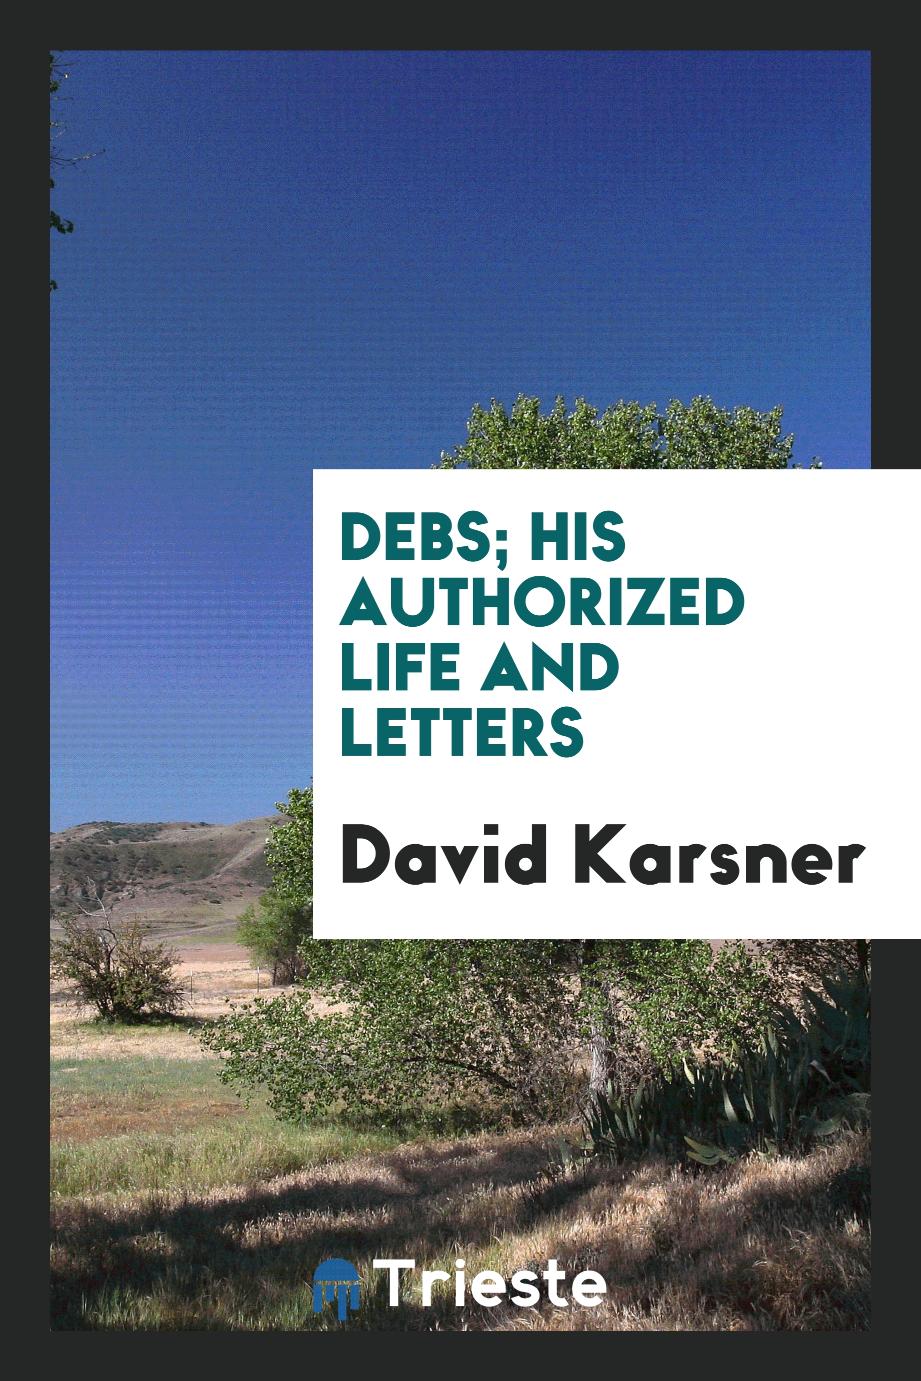 Debs; his authorized life and letters